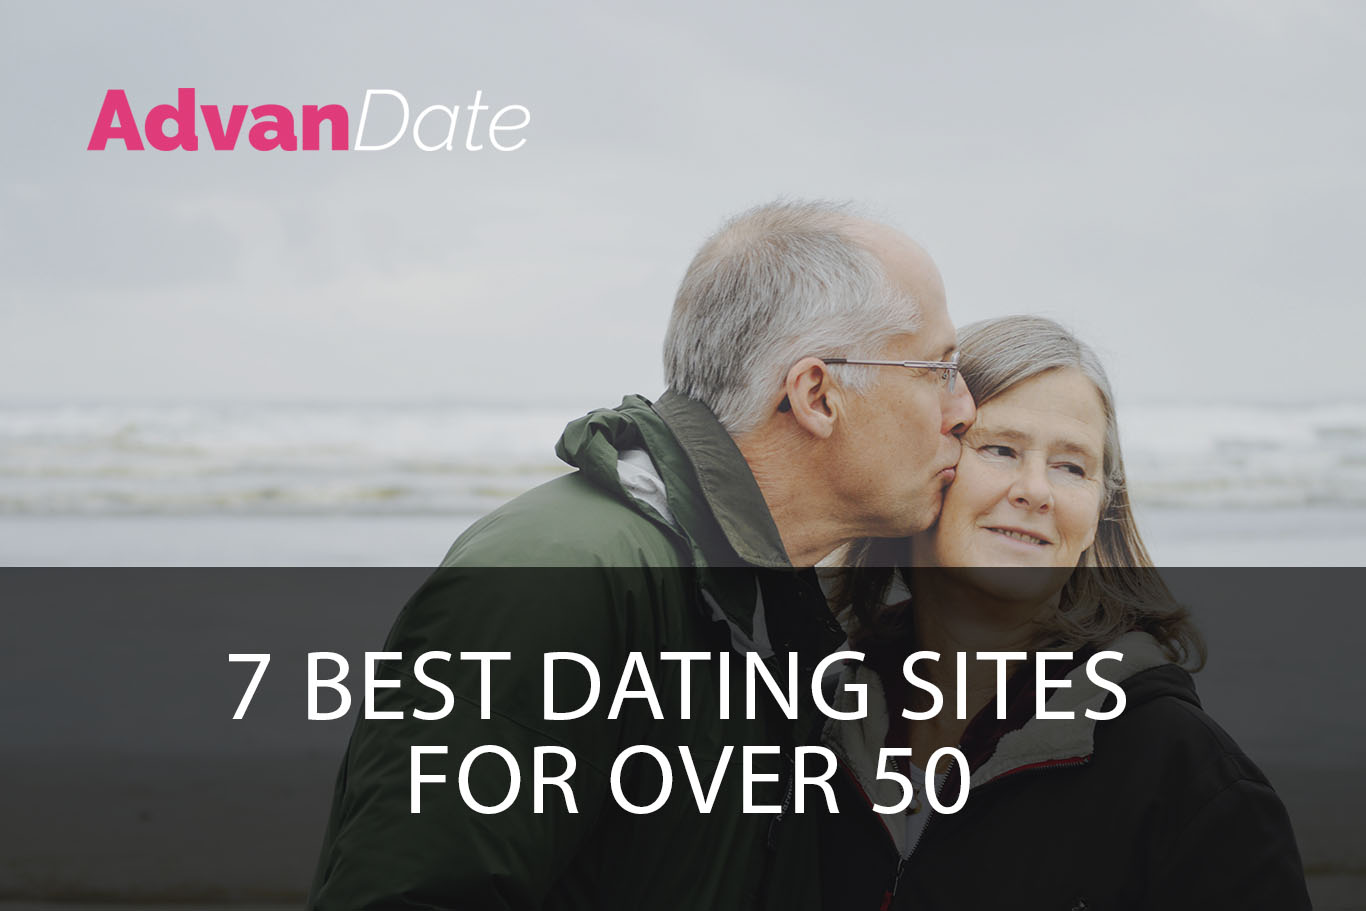 7 best dating sites for over 50